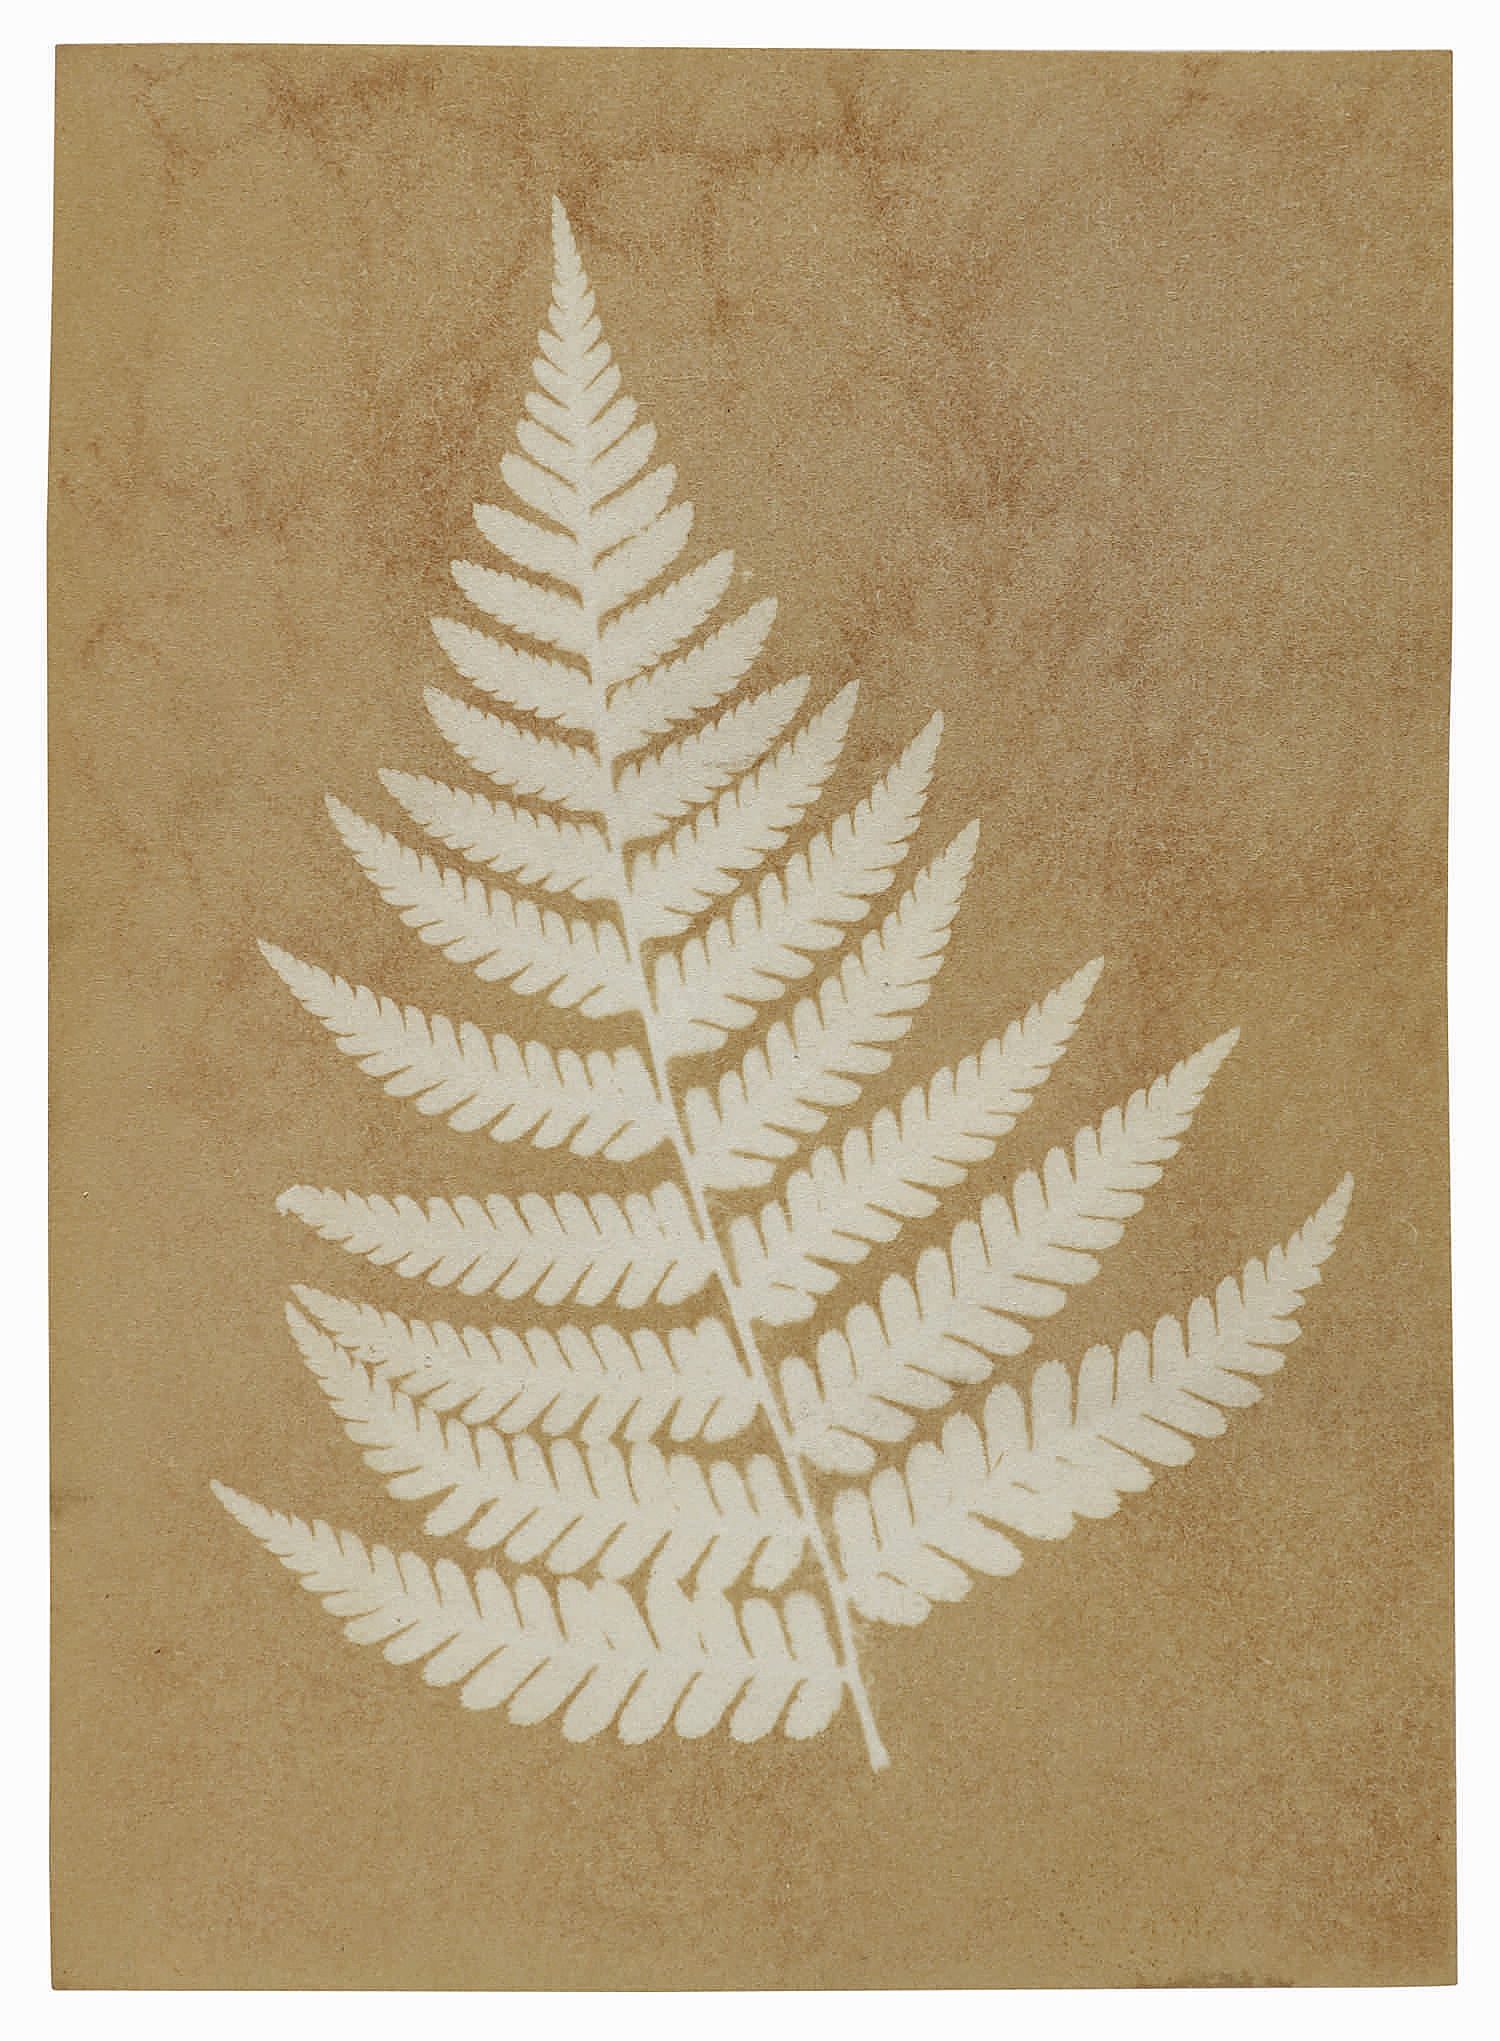 What is considered the earliest dated photograph, a December 2, 1839, image of a fern taken by the “Father of British Forensics” Alfred Swaine Taylor, was bid to $8,750.